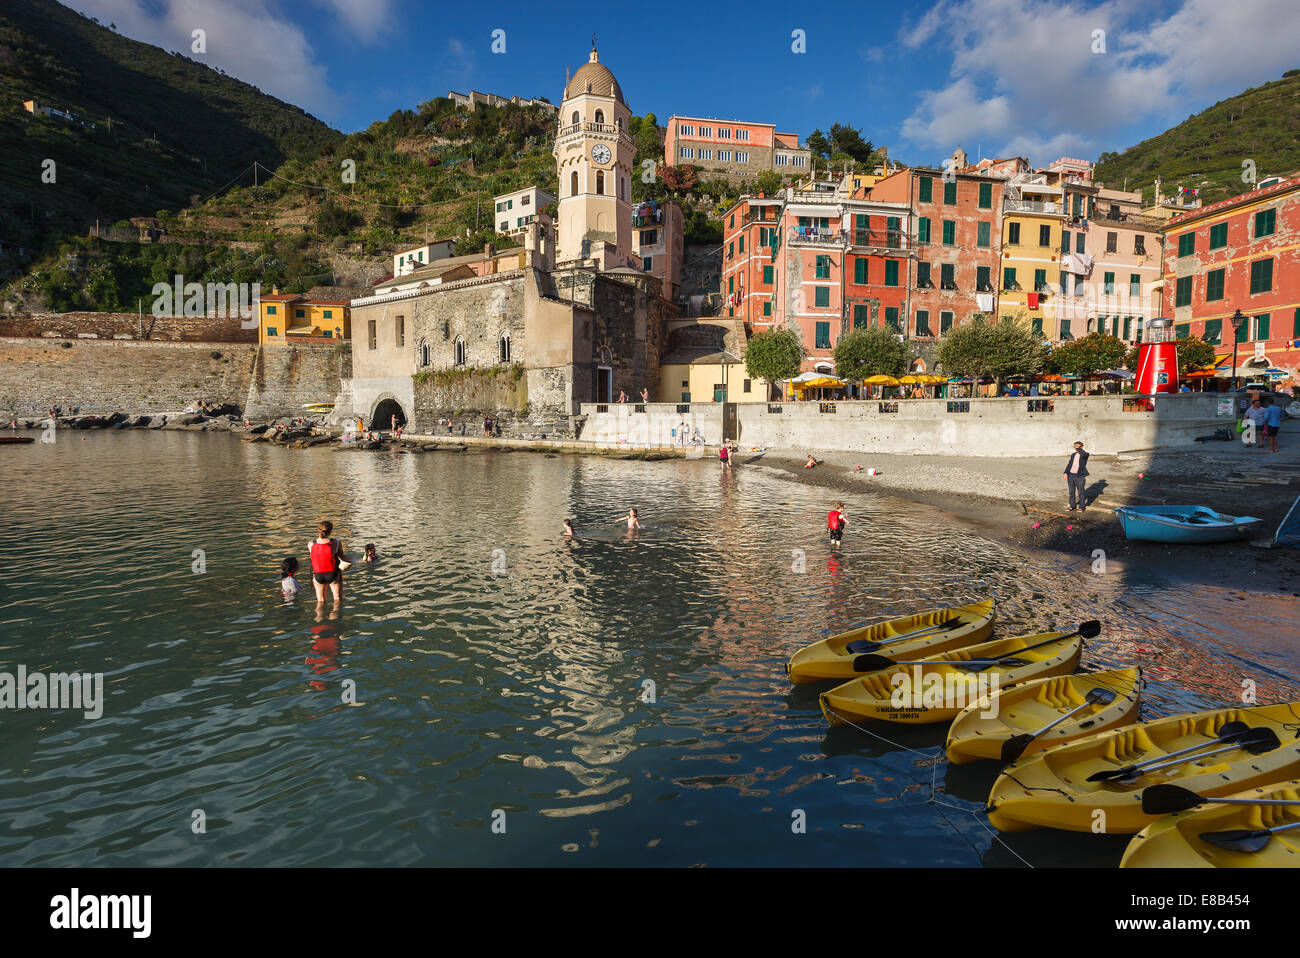 Vernazza in the evening, Cinque Terre (Five Lands) National Park, Liguria, Italy, Europe. Stock Photo